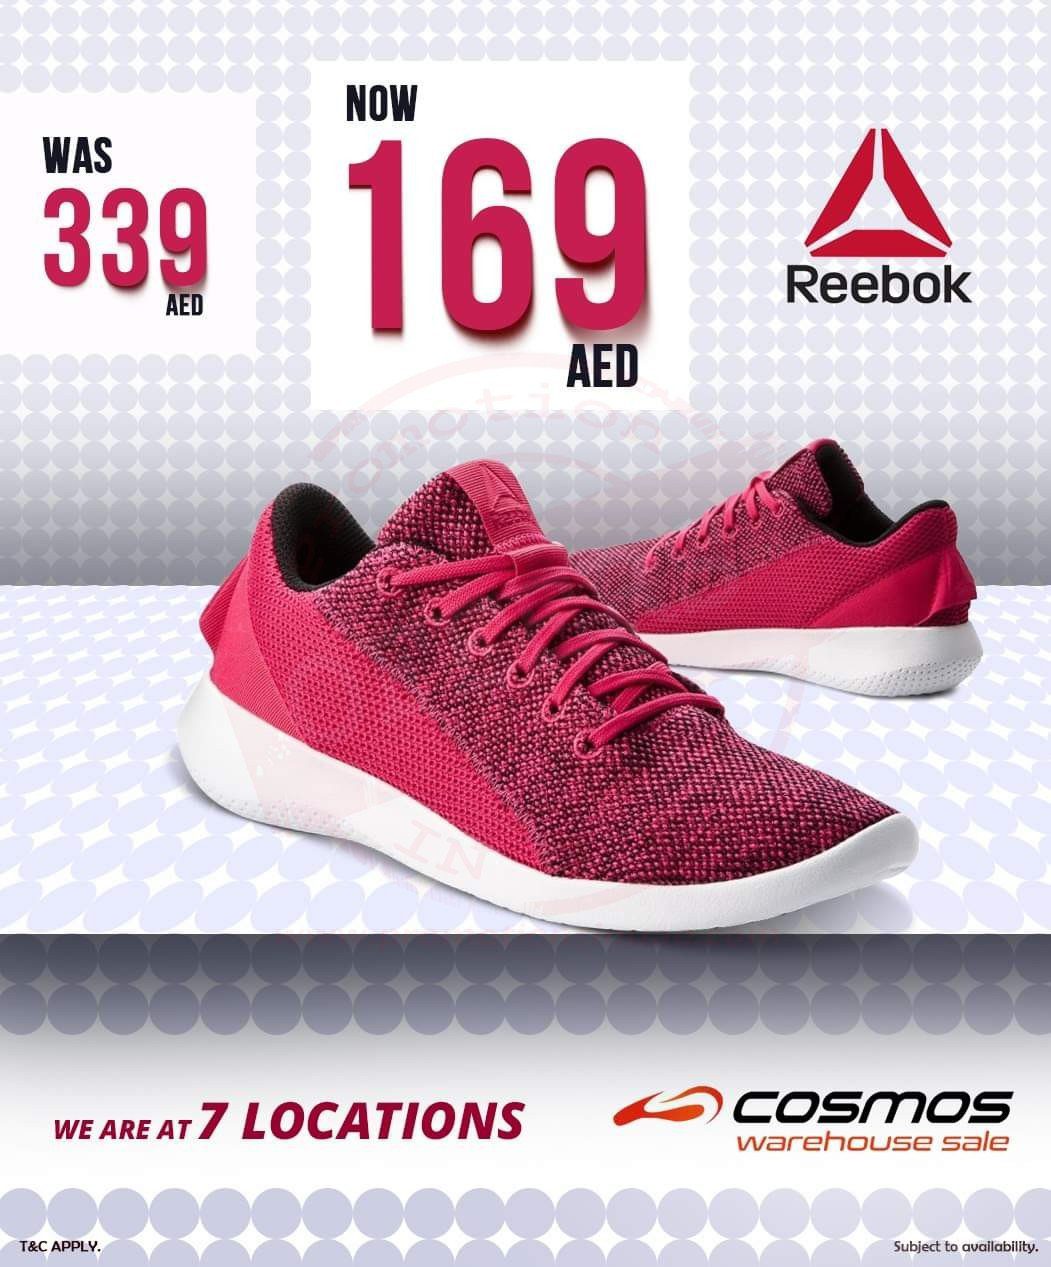 FB IMG 1575816656534 Reebok footwear?<br>AED 339 is now at AED 169 at Cosmos Sports